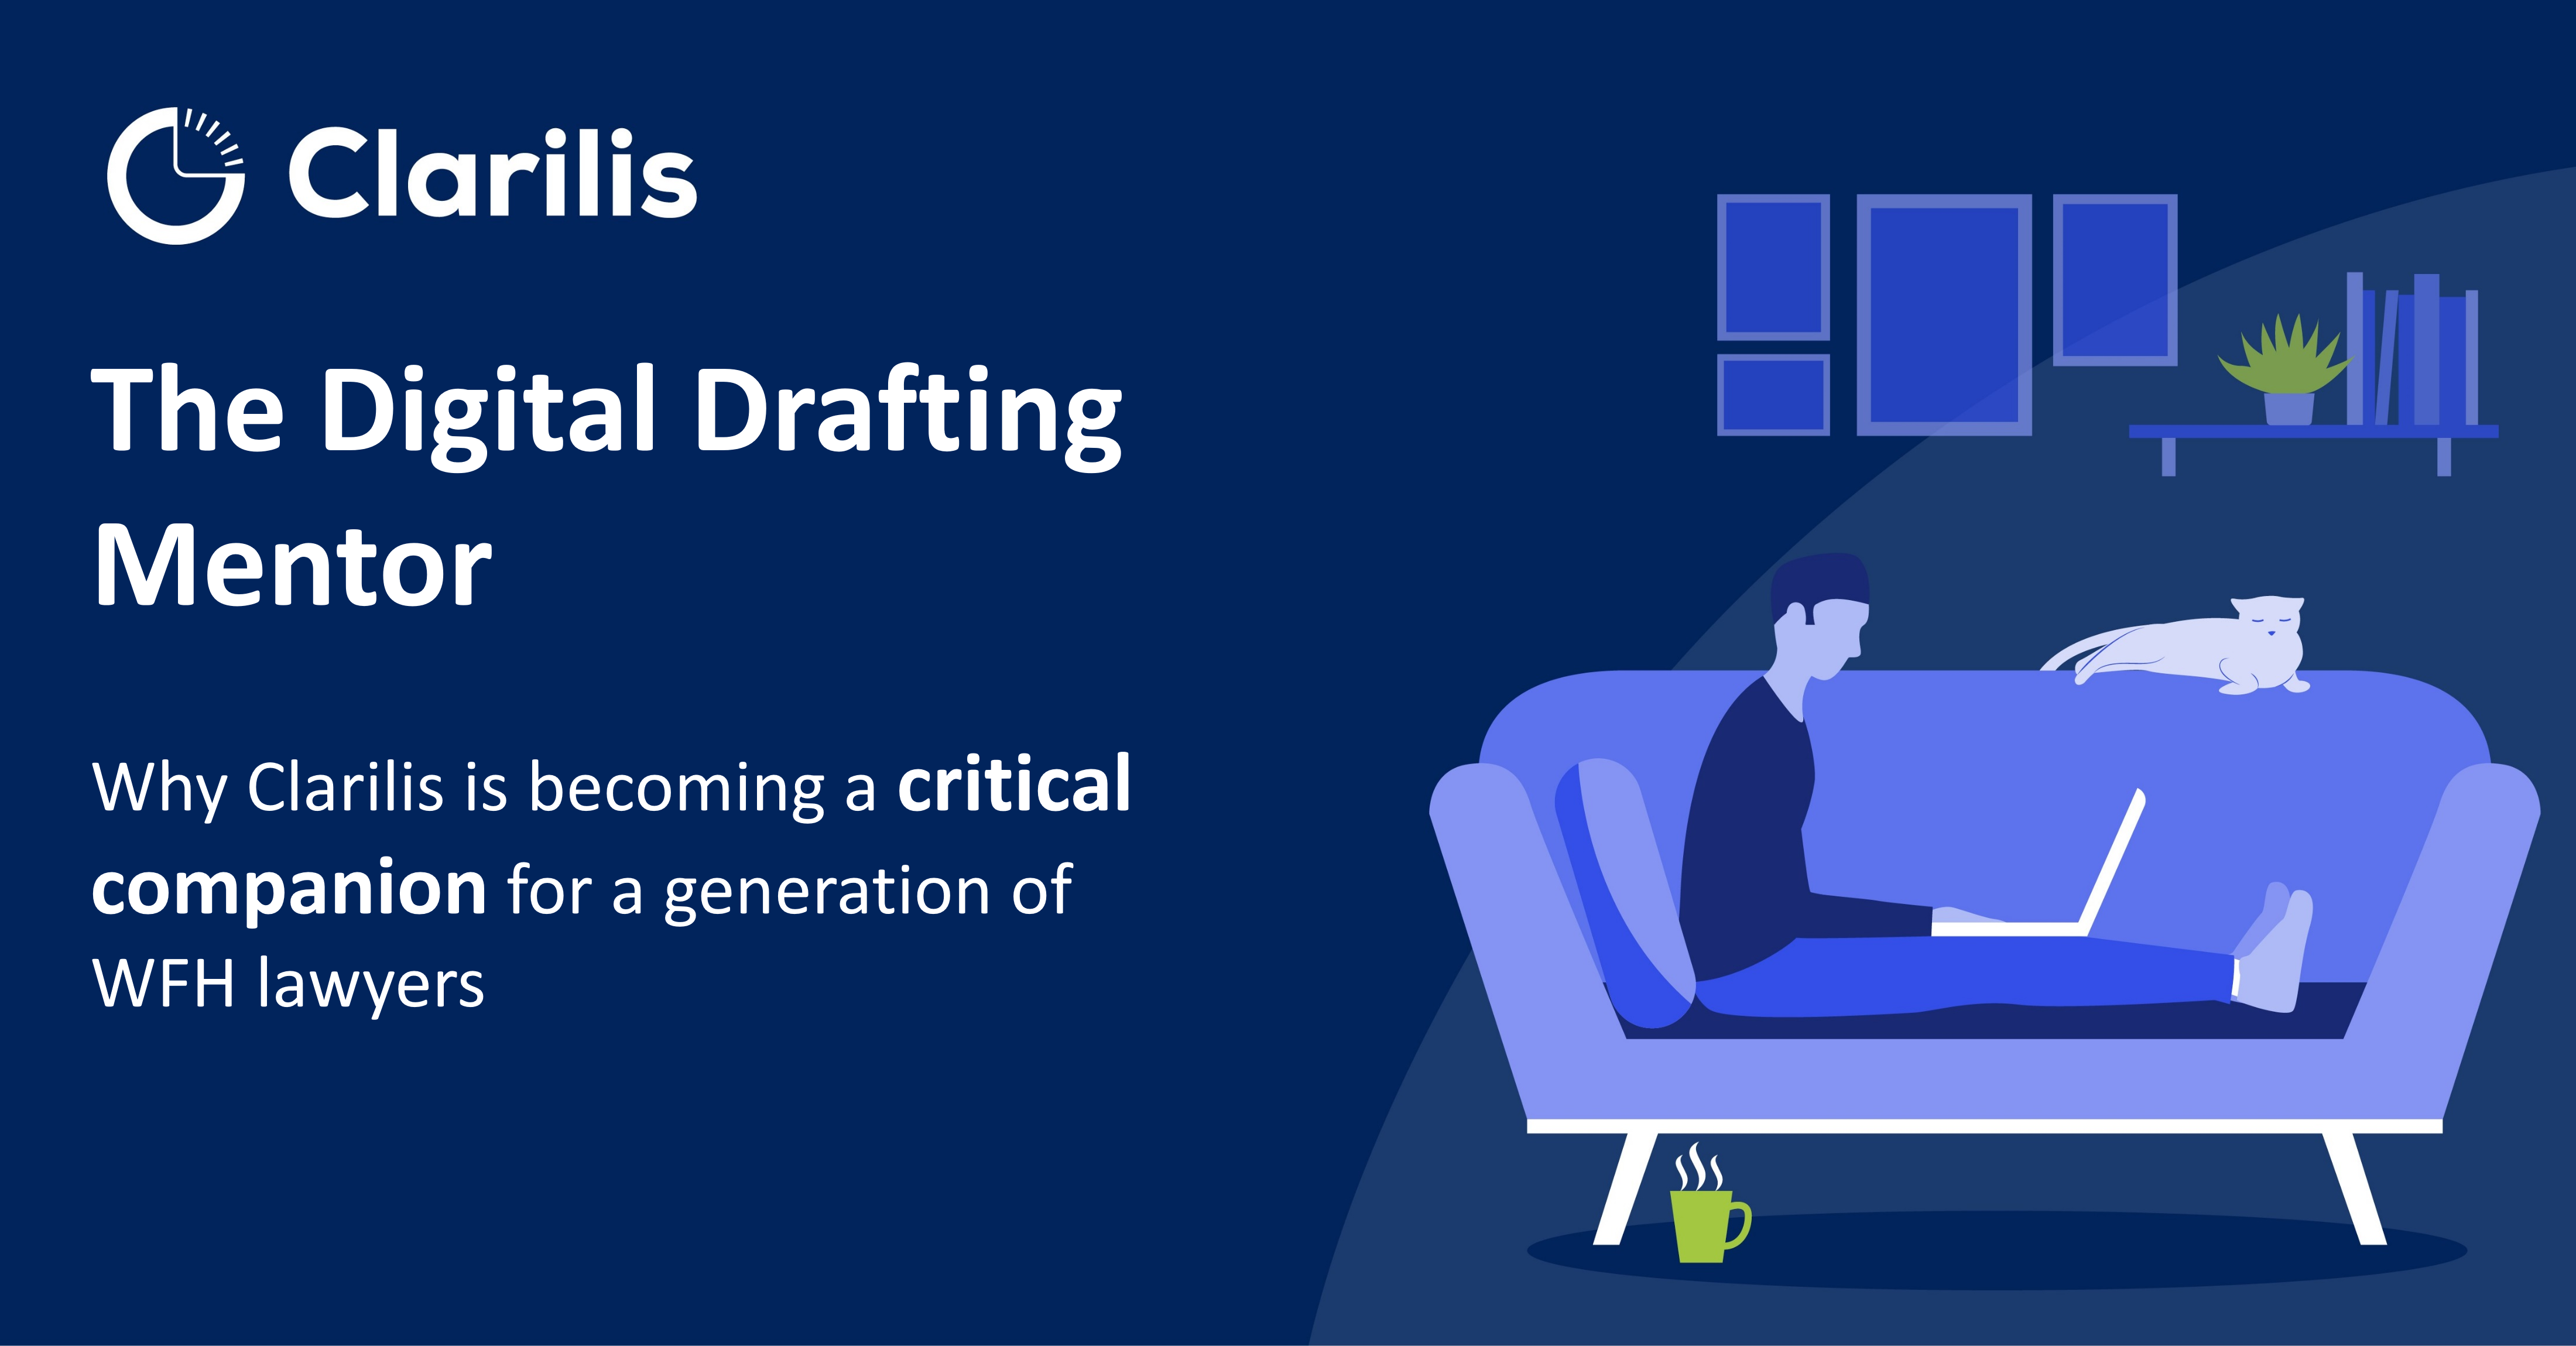 The Digital Drafting Mentor: Why Clarilis is becoming a critical companion for a generation of work from home lawyers